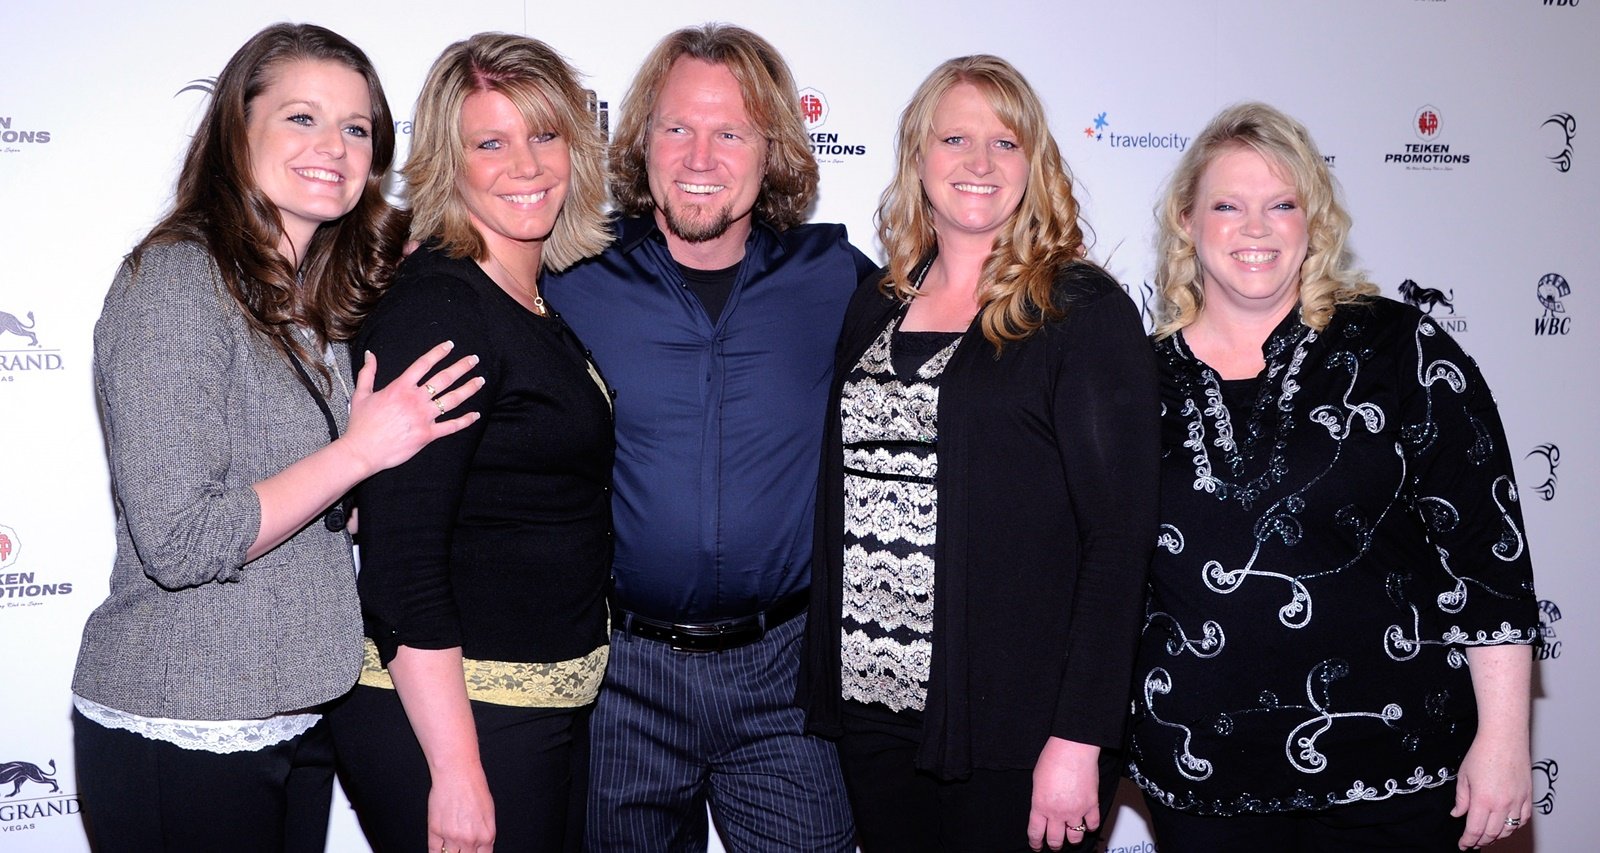 Robyn Brown from “Sister Wives”, Wiki, Family, Kody Brown Wife, Early Life, Facts to Know